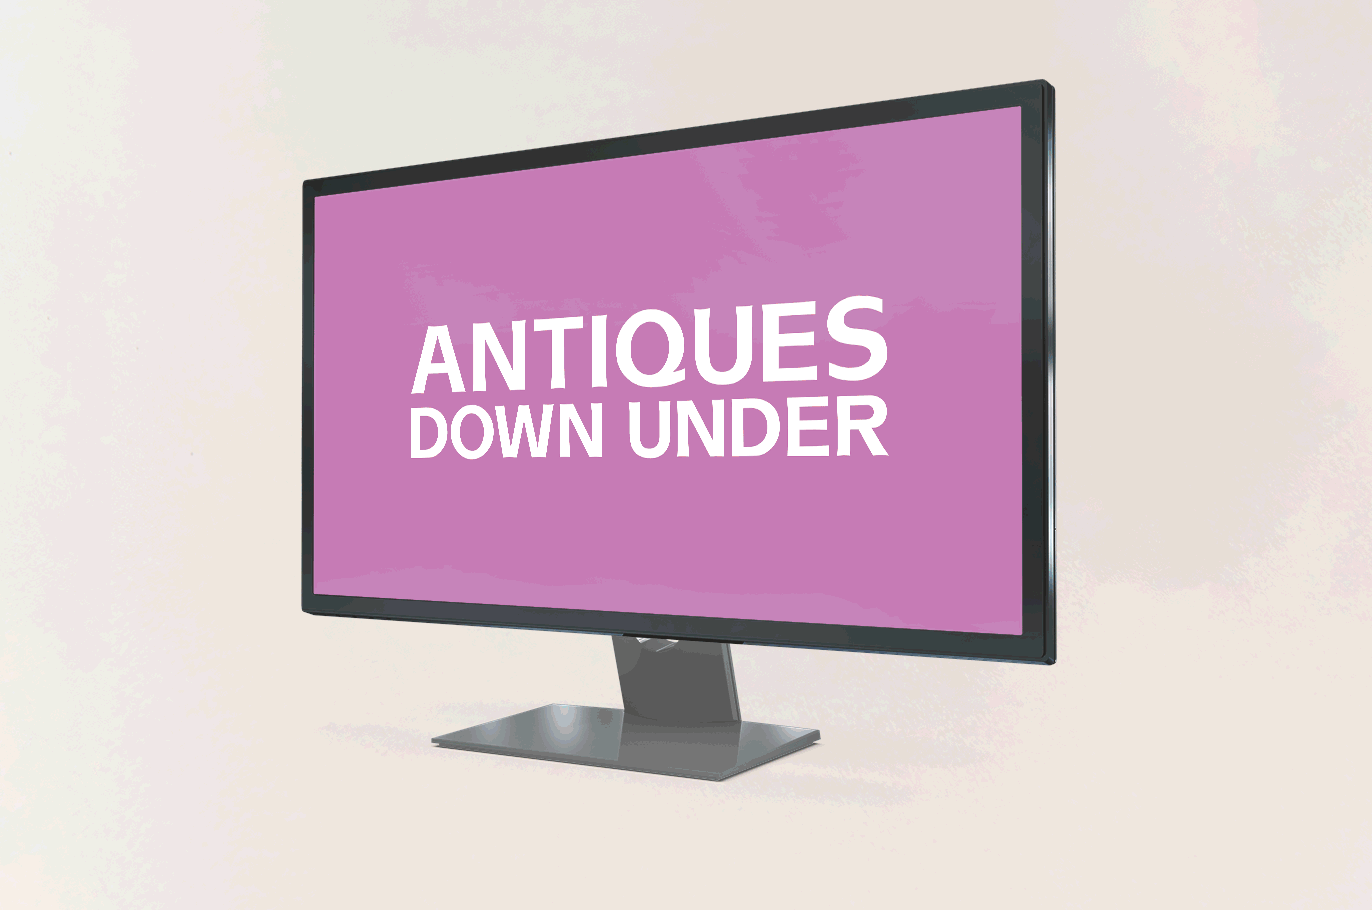 Antiques Down Under animation